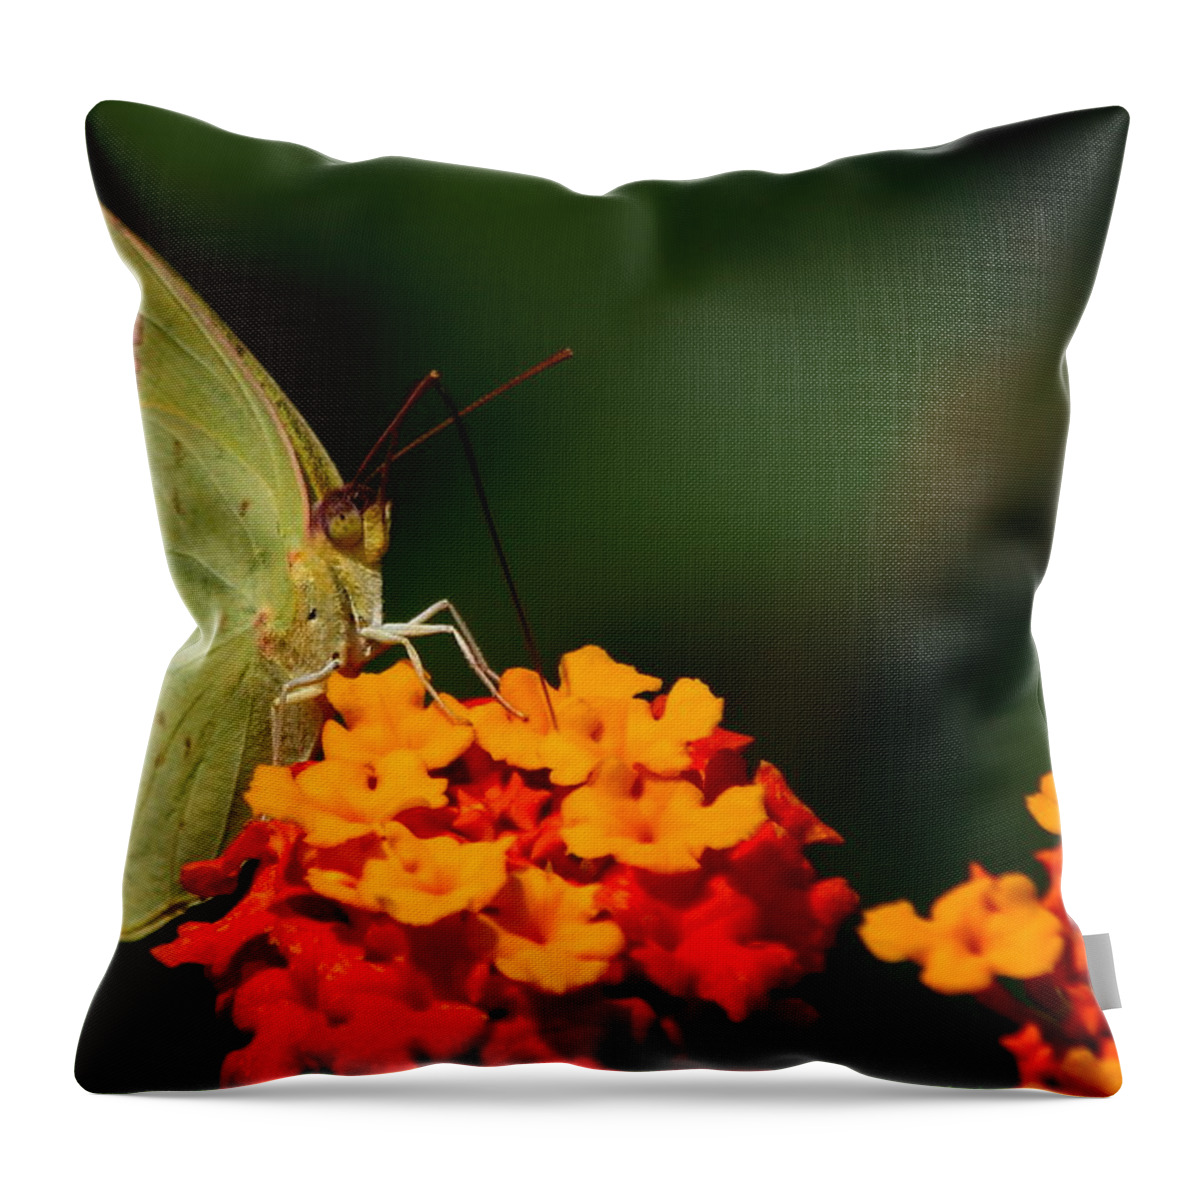 Butterfly Photography Throw Pillow featuring the photograph Closeness by Reid Callaway